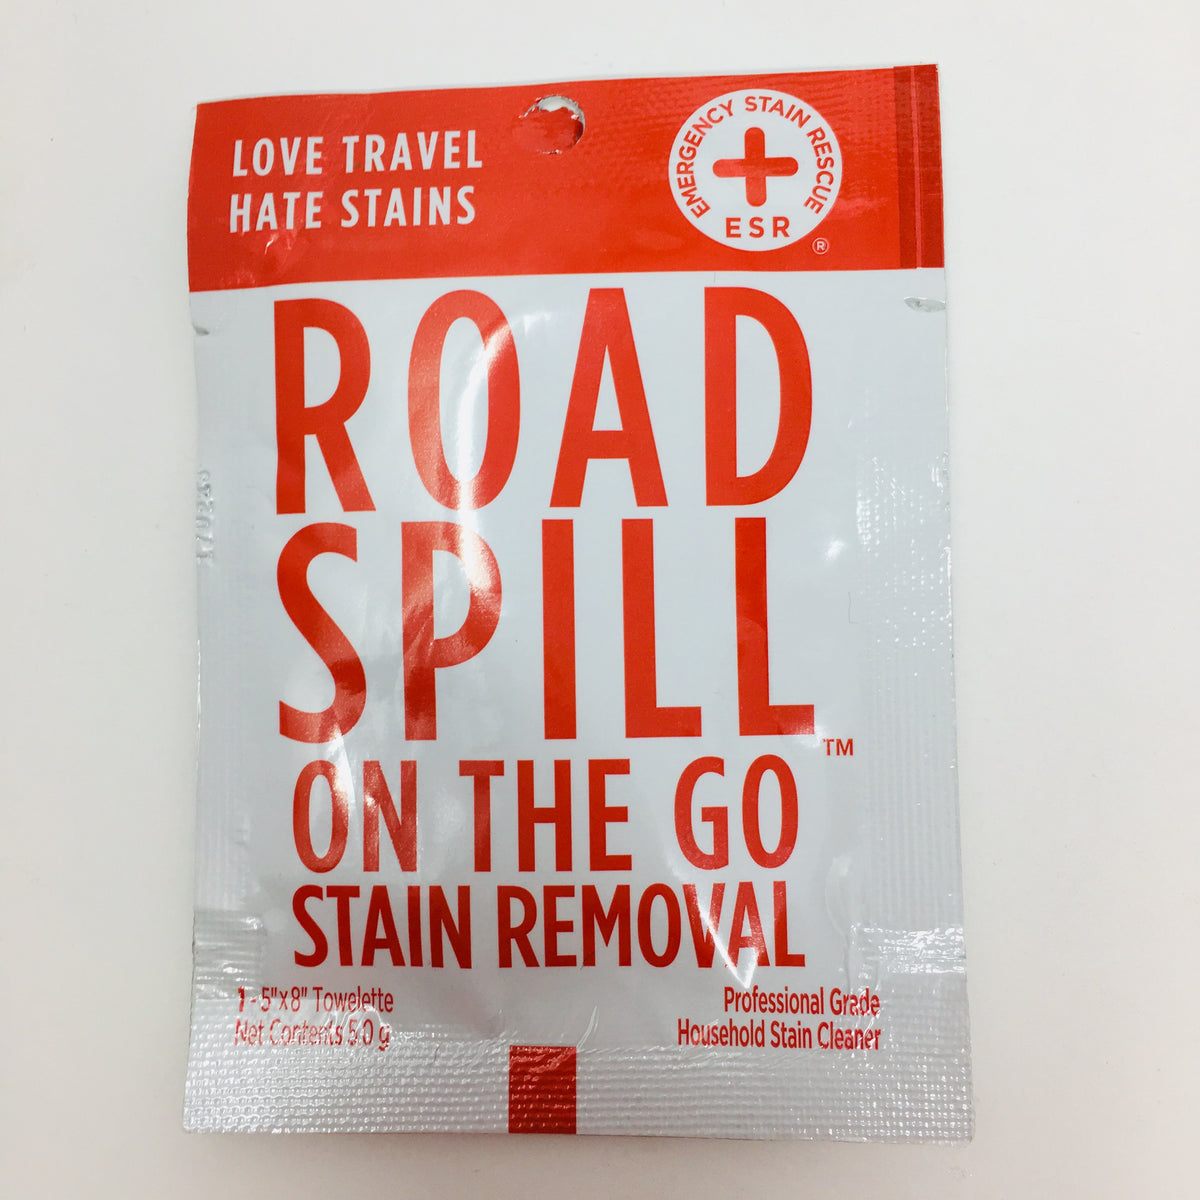 Road Spill On the Go Stain Removal